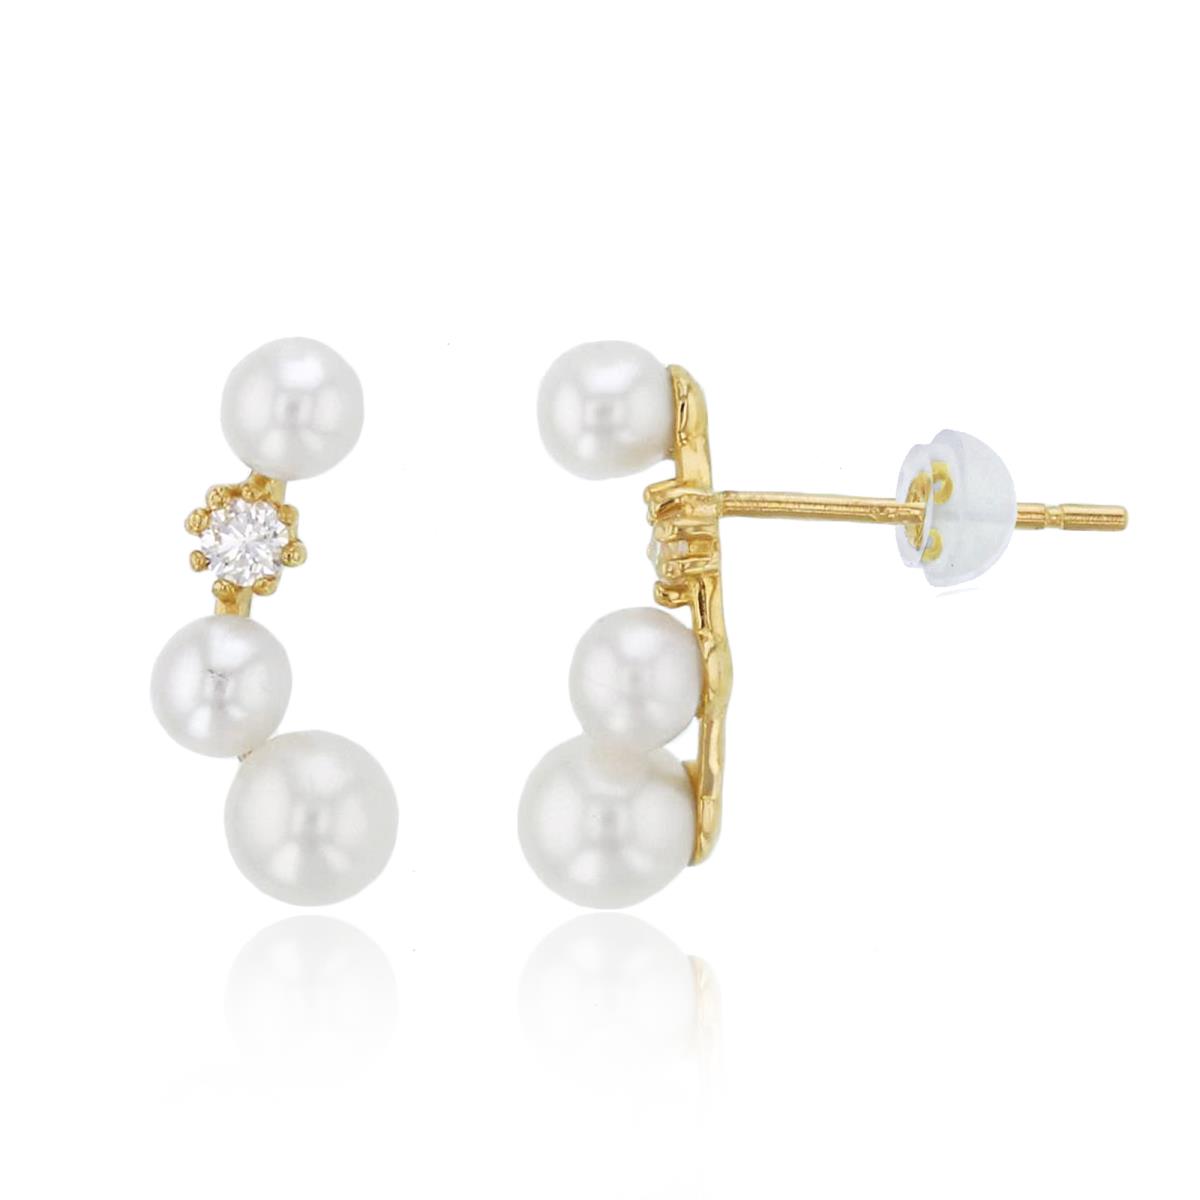 14K Yellow Gold Rnd CZ & 3mm/4mm Fresh Water Pearl Crawl Earrings with Silicon Backs